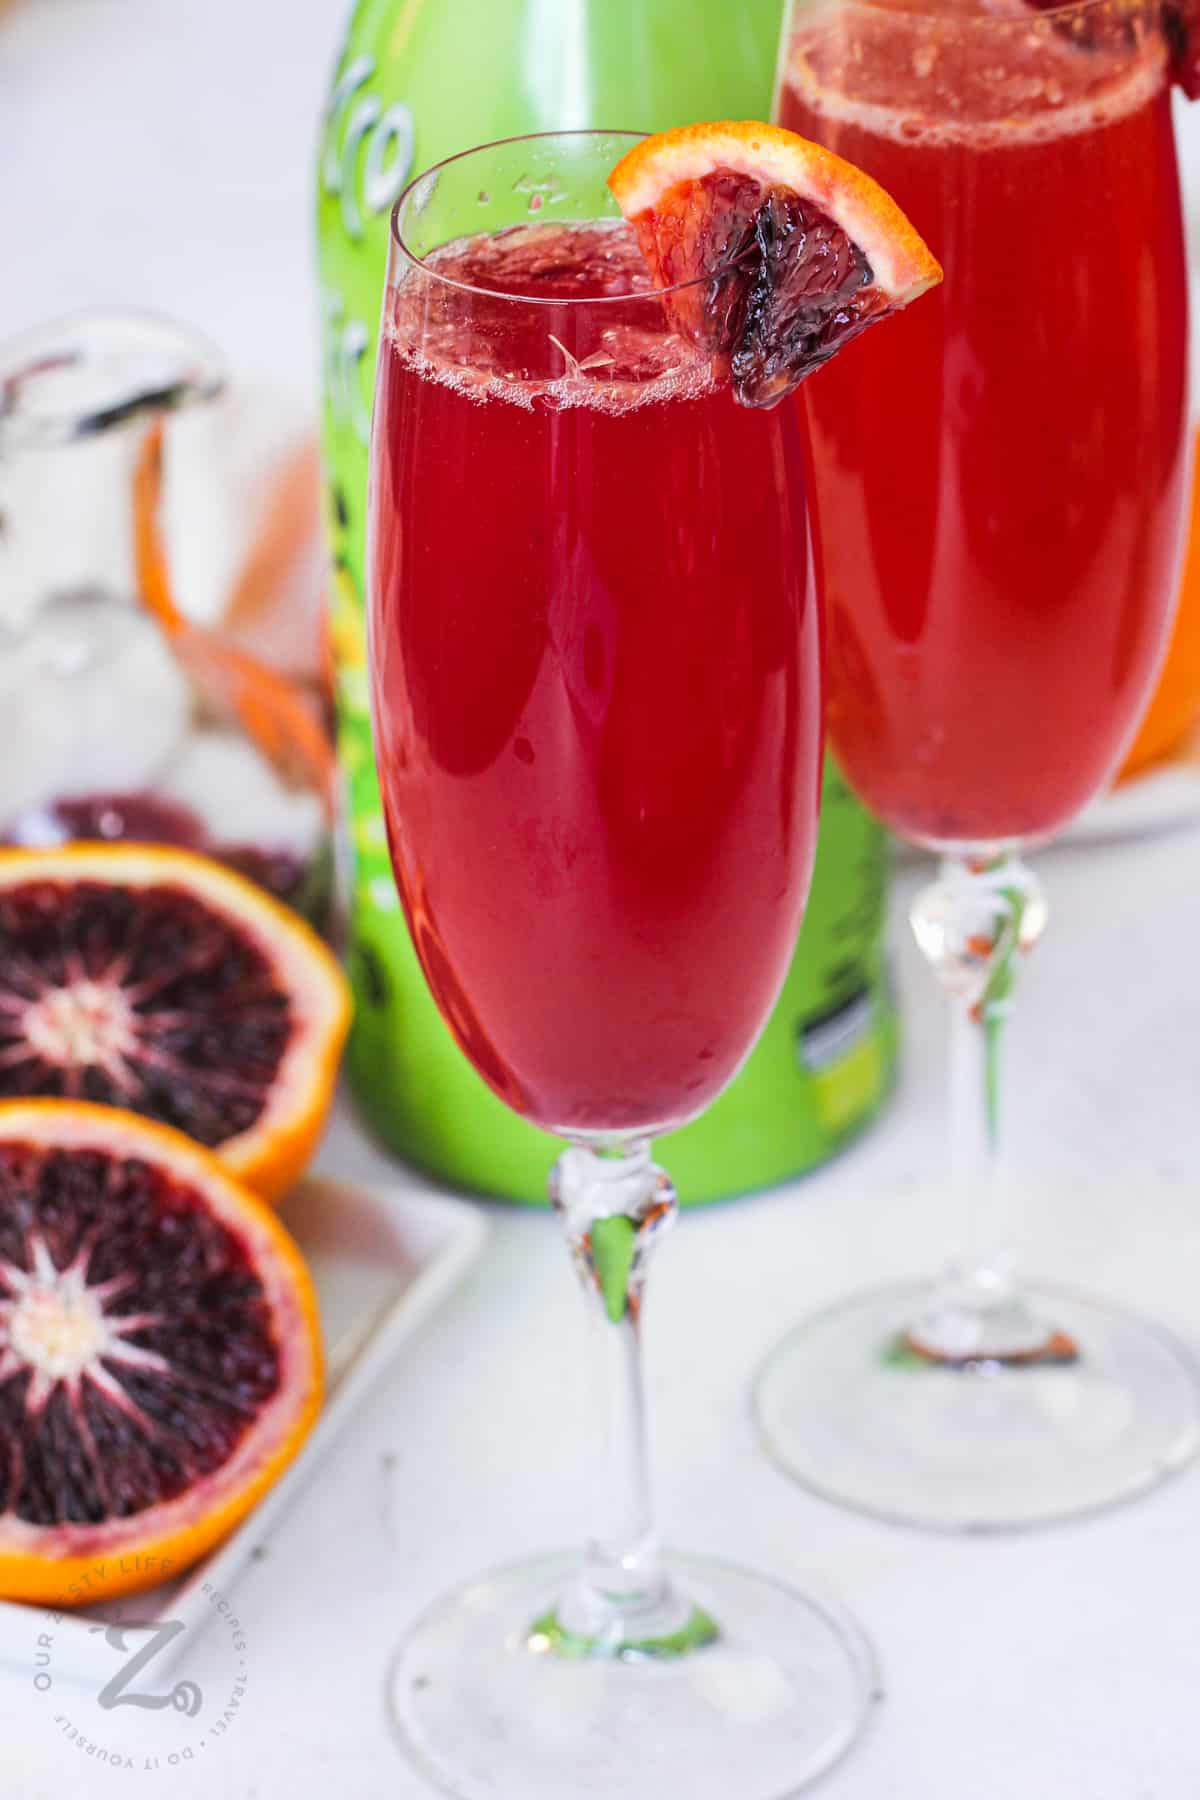 https://ourzestylife.com/wp-content/uploads/2023/05/Blood-Orange-Mimosa-2-OurZestyLife-10.jpg